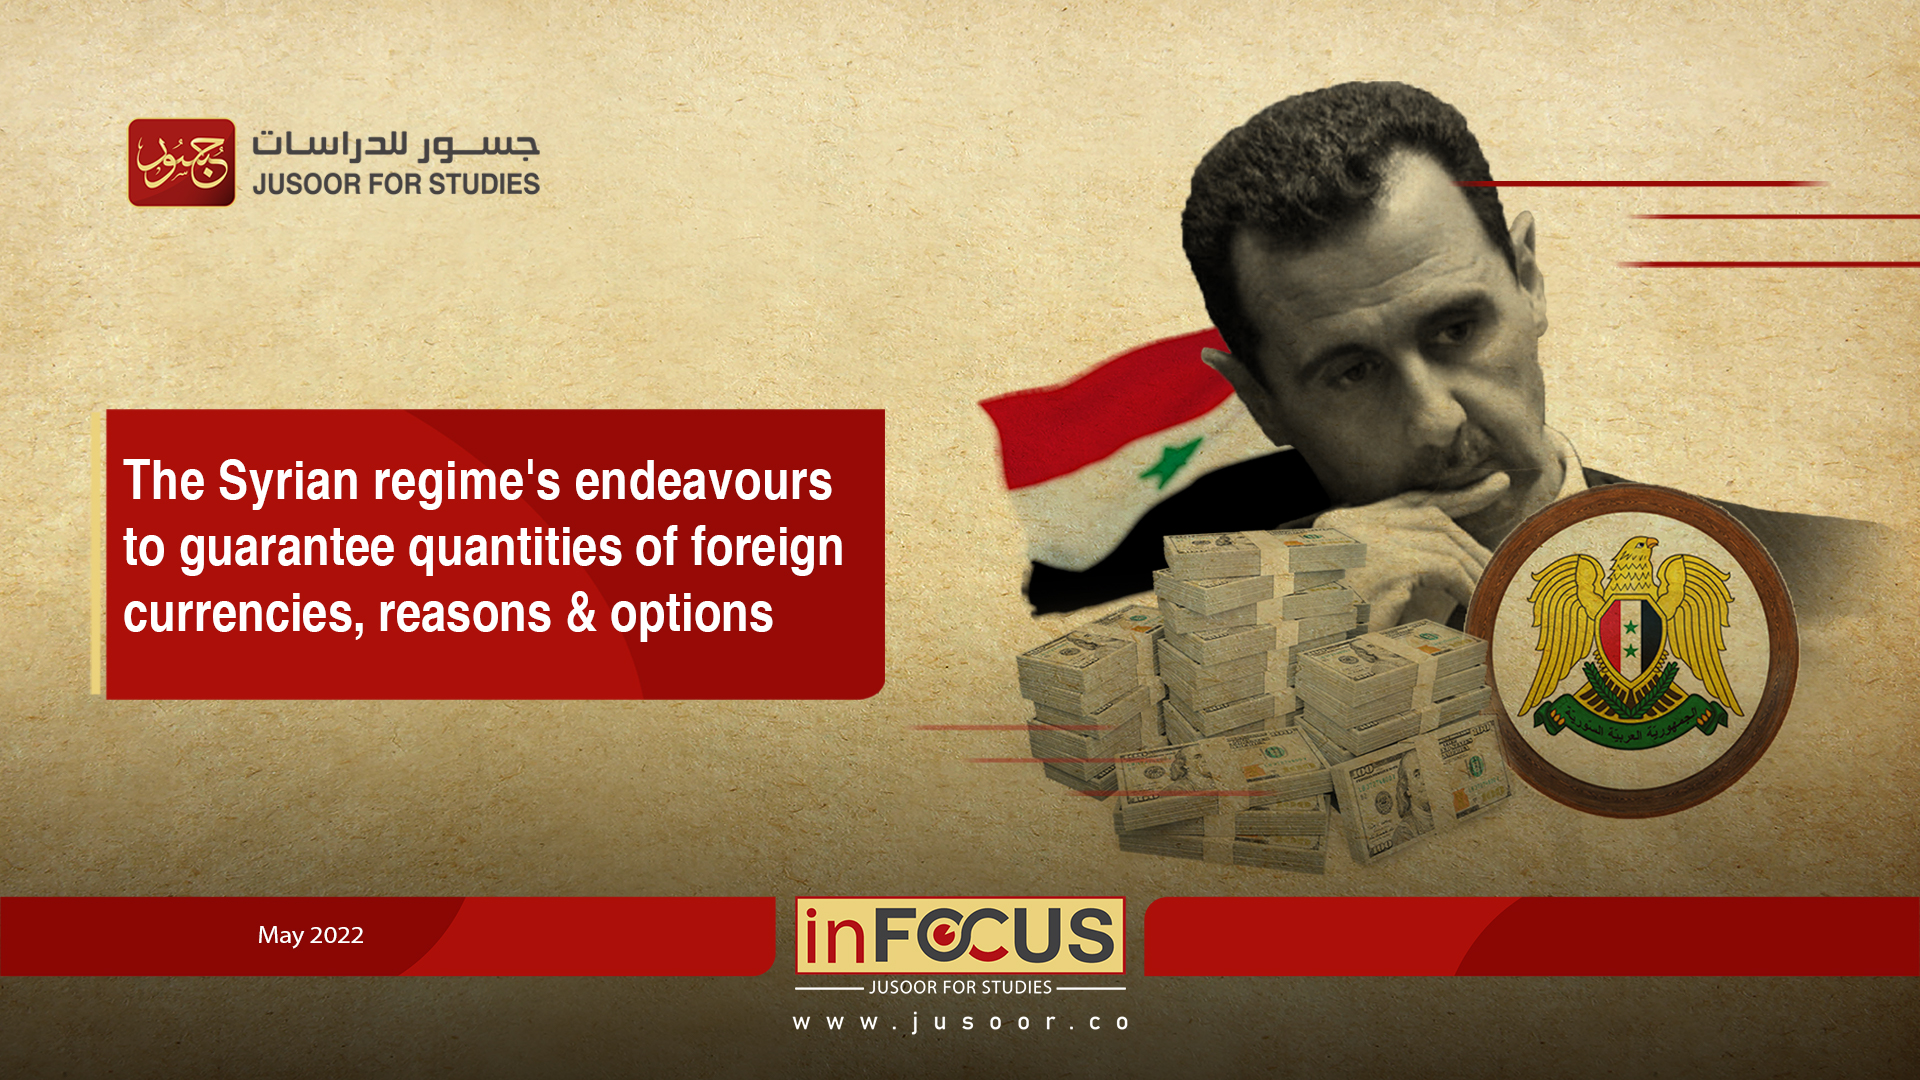 The Syrian regime's endeavours to guarantee quantities of foreign currencies, reasons & options